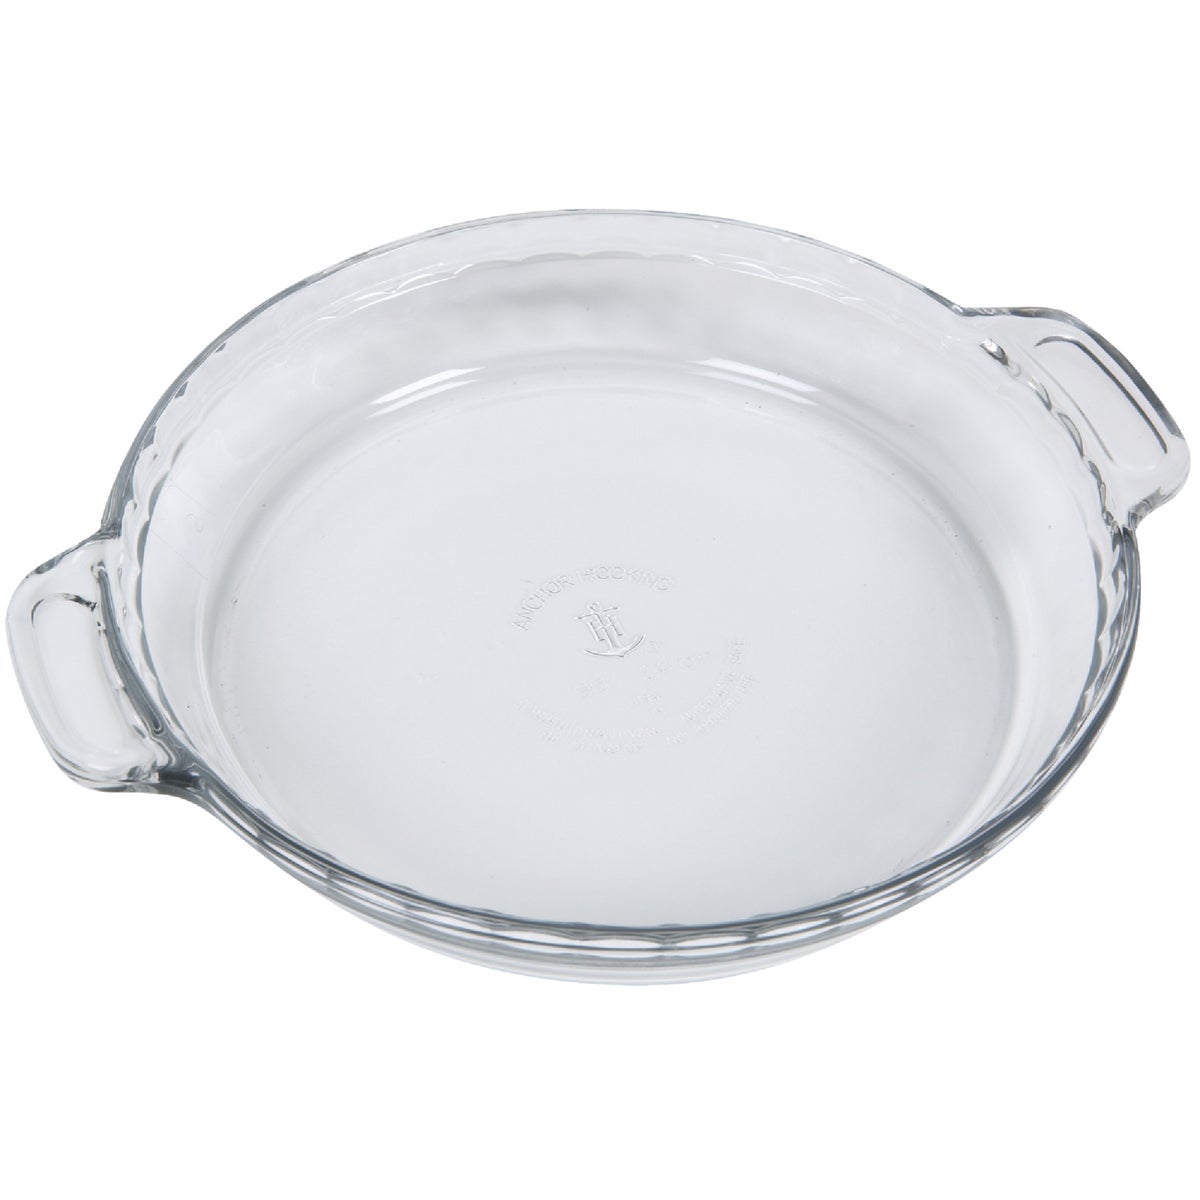 Anchor Hocking Oven Basics 9.5 In. Deep Pie Plate